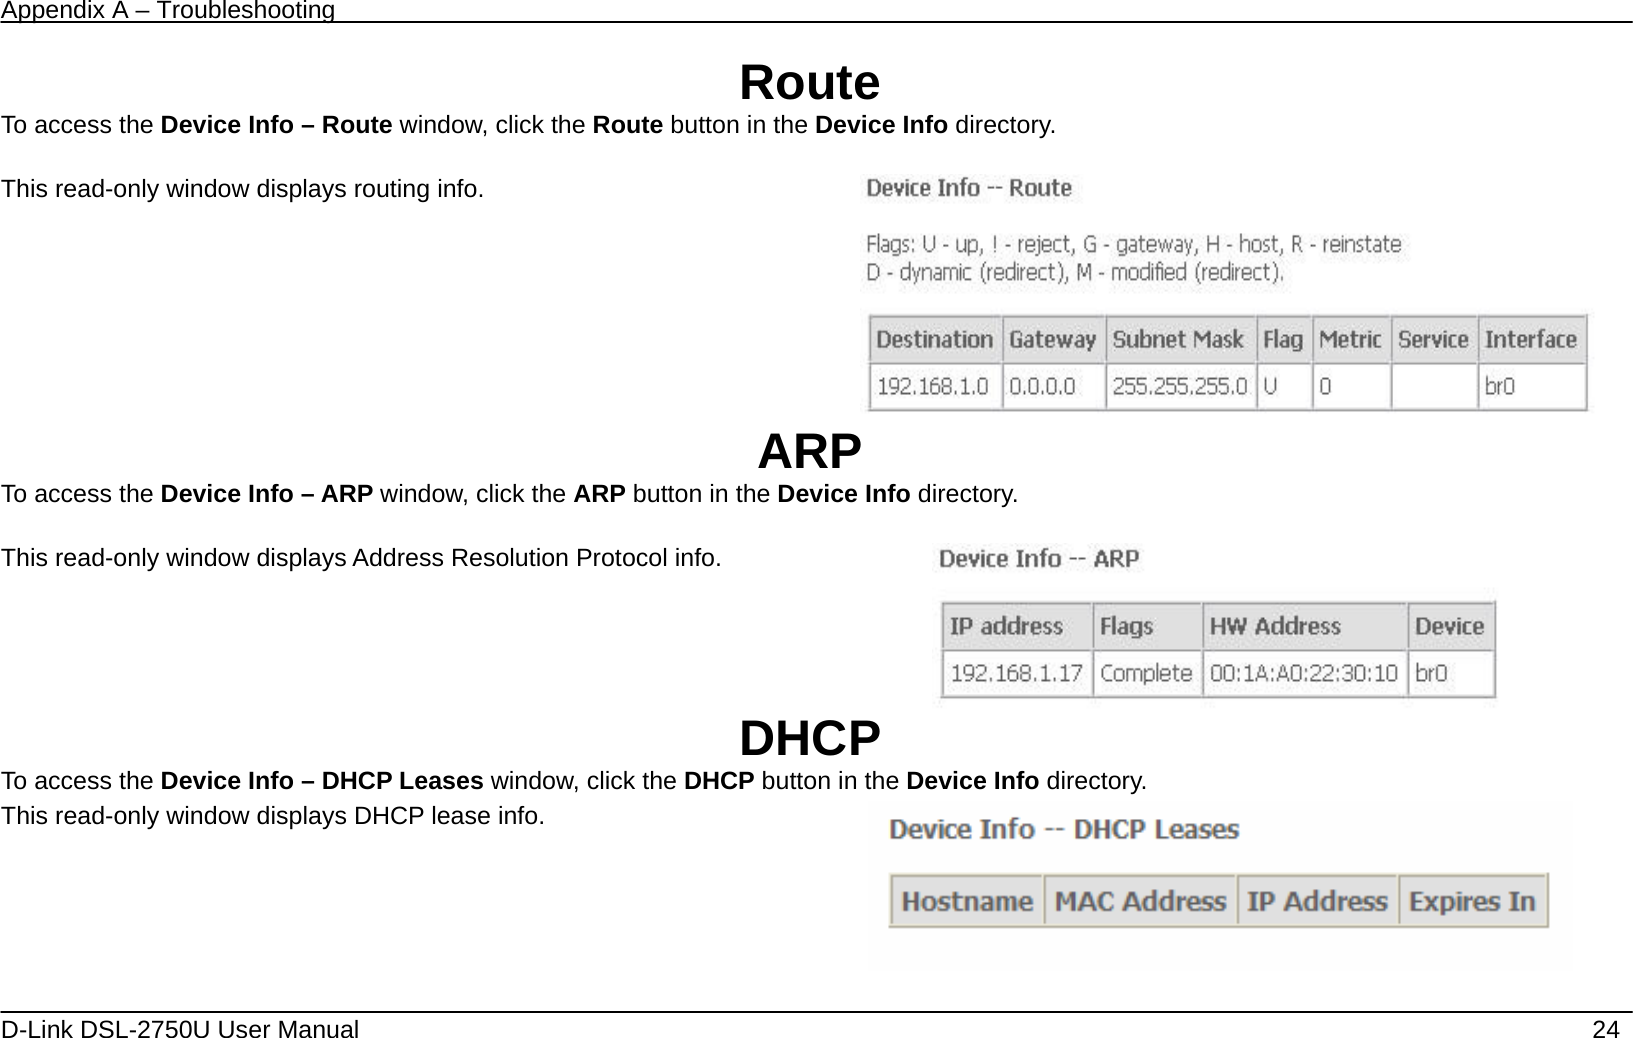 Appendix A – Troubleshooting   D-Link DSL-2750U User Manual    24 Route To access the Device Info – Route window, click the Route button in the Device Info directory.  This read-only window displays routing info.     ARP To access the Device Info – ARP window, click the ARP button in the Device Info directory.  This read-only window displays Address Resolution Protocol info.   DHCP To access the Device Info – DHCP Leases window, click the DHCP button in the Device Info directory. This read-only window displays DHCP lease info.    